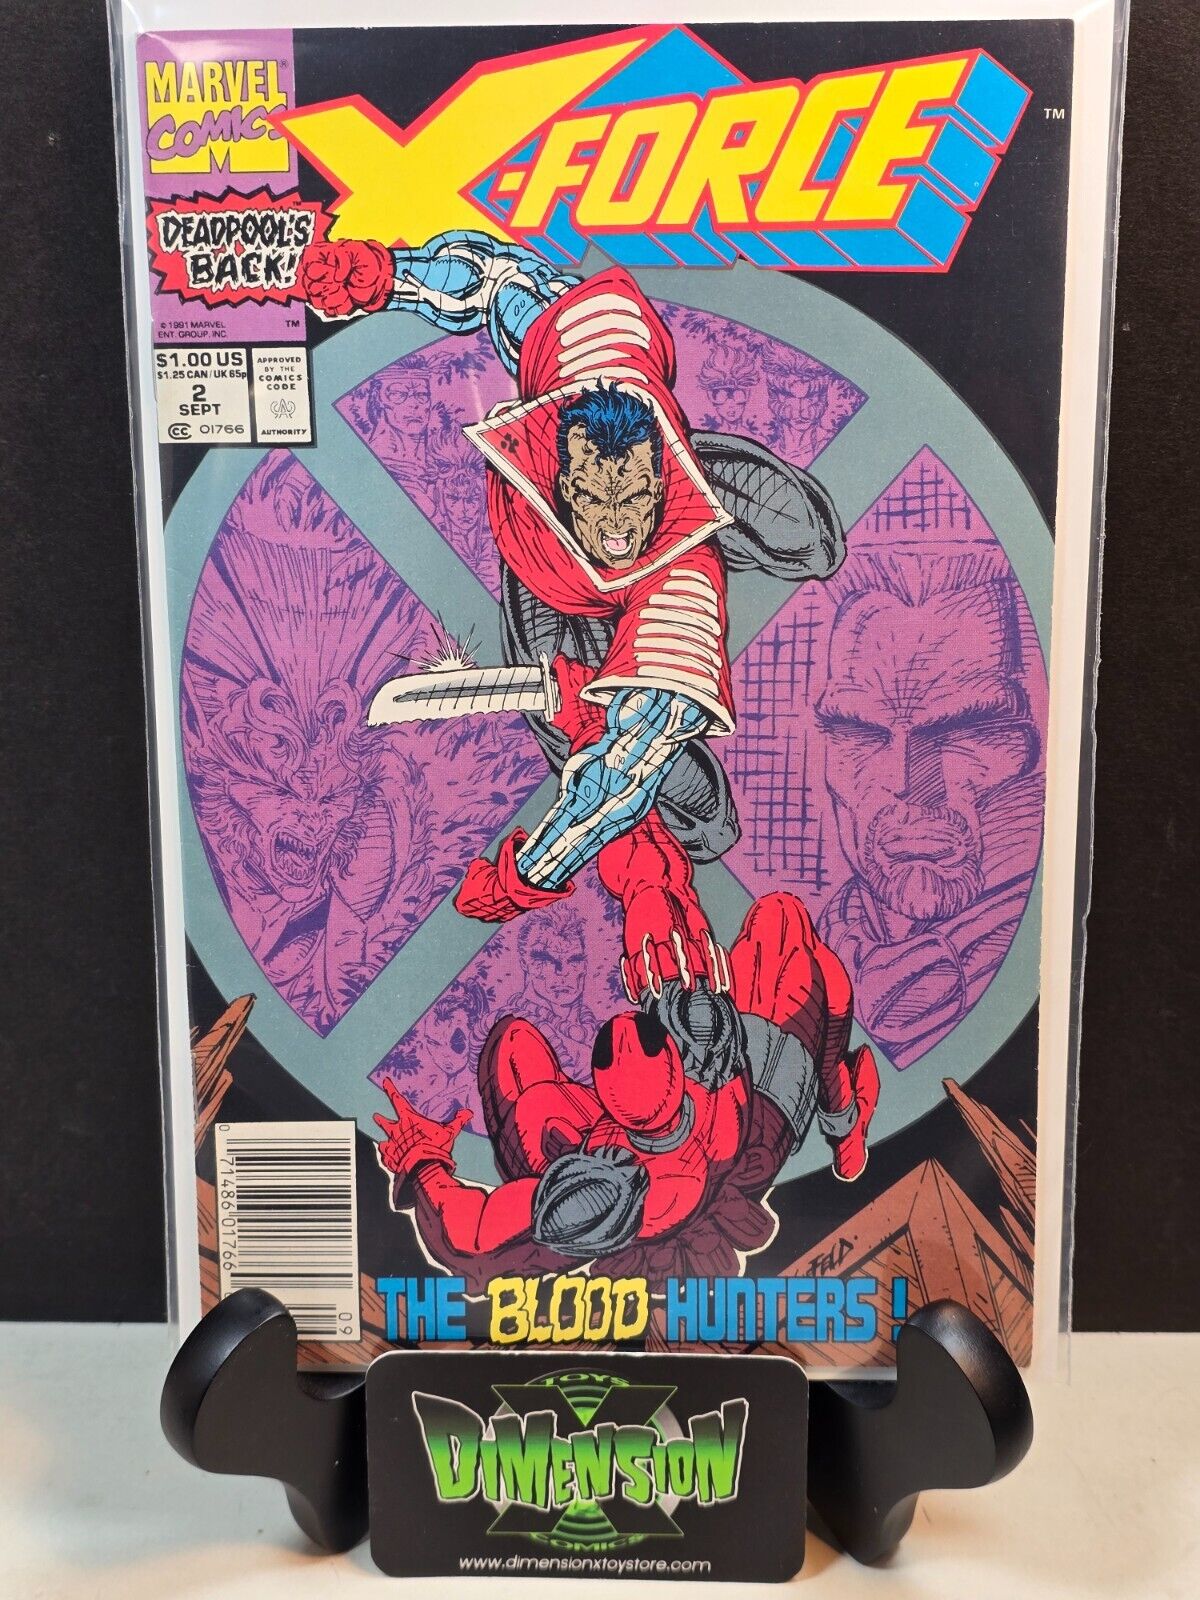 X-FORCE #2 MARVEL COMICS 1991 KEY ISSUE DEADPOOL 2ND APPEARANCE VF NEWSTAND